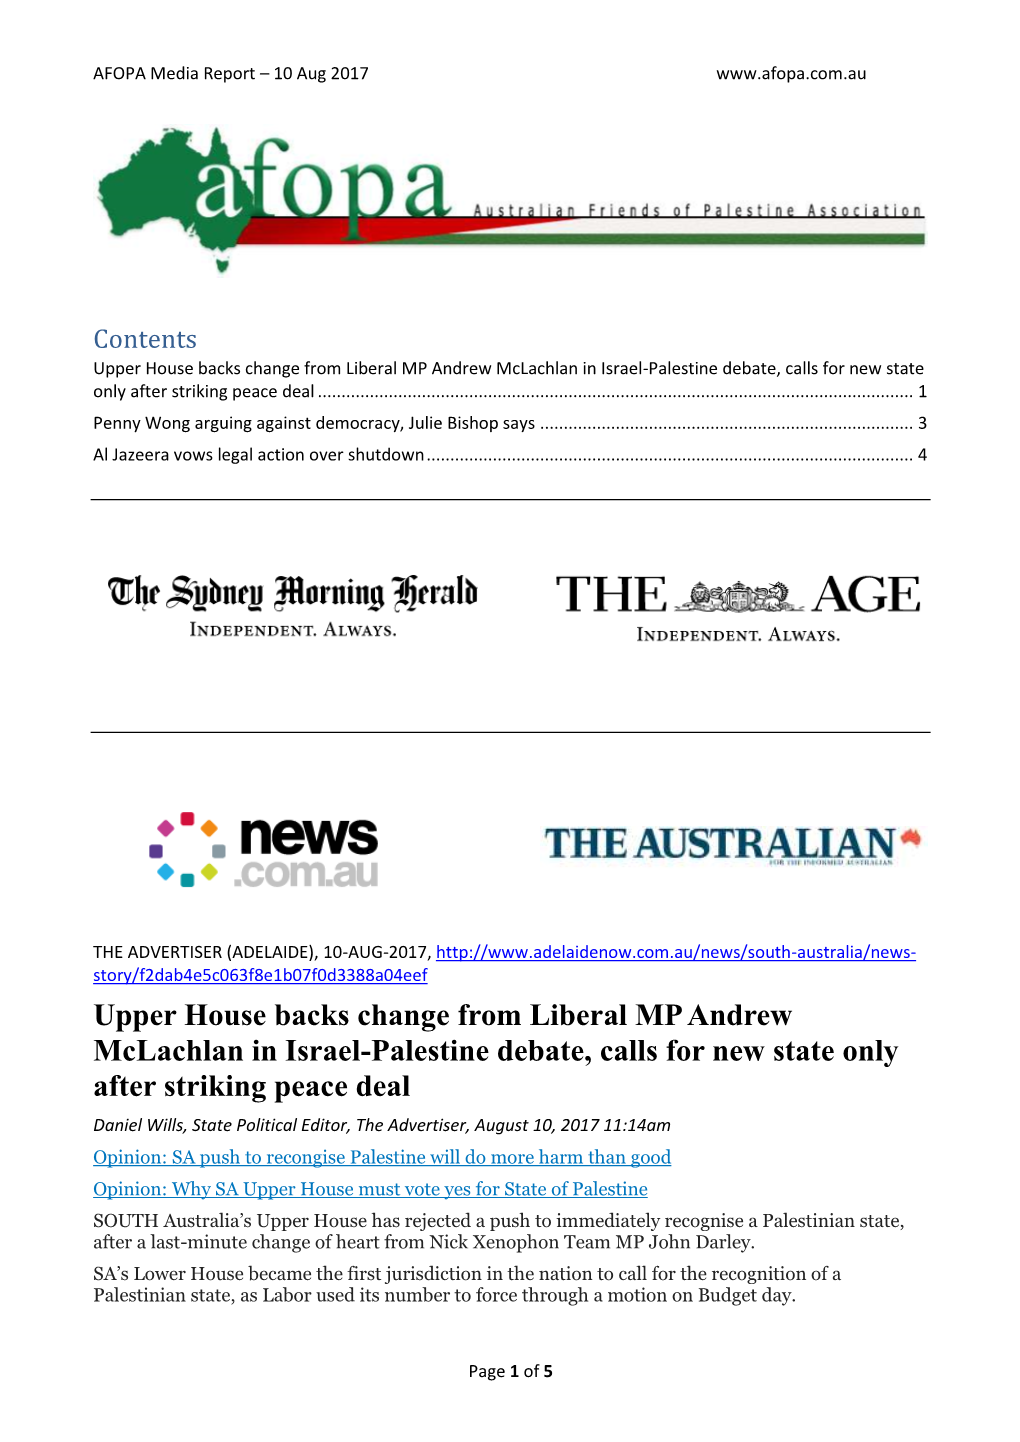 Upper House Backs Change from Liberal MP Andrew Mclachlan in Israel-Palestine Debate, Calls for New State Only After Striking Peace Deal